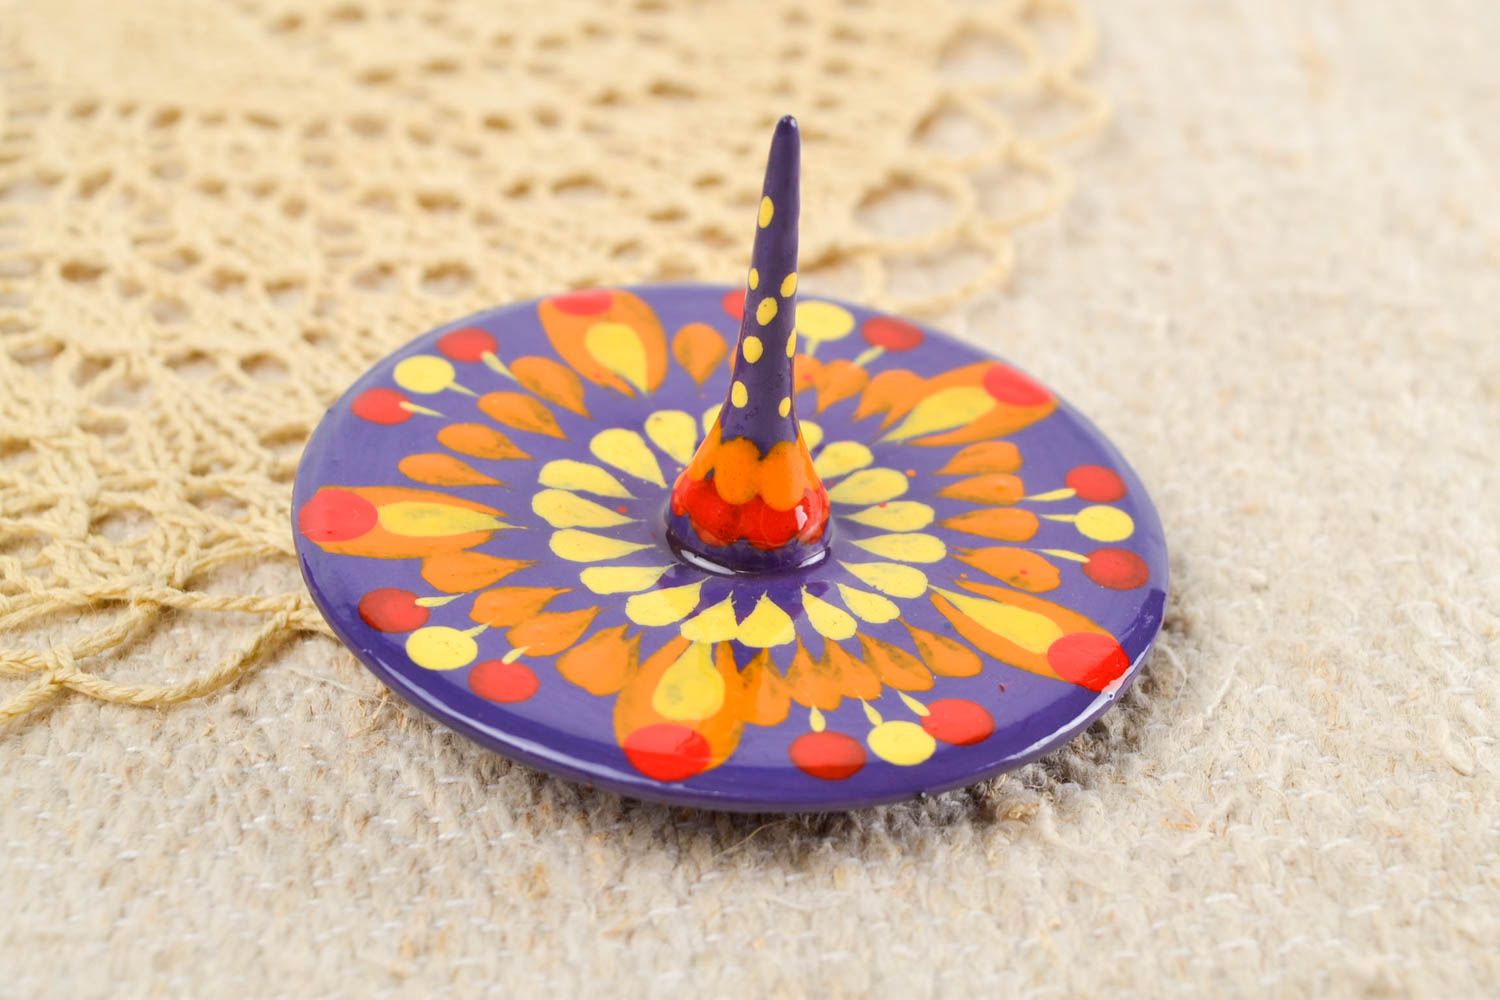 Unusual handmade wooden smart toy spinning top spin top birthday gift ideas photo 1